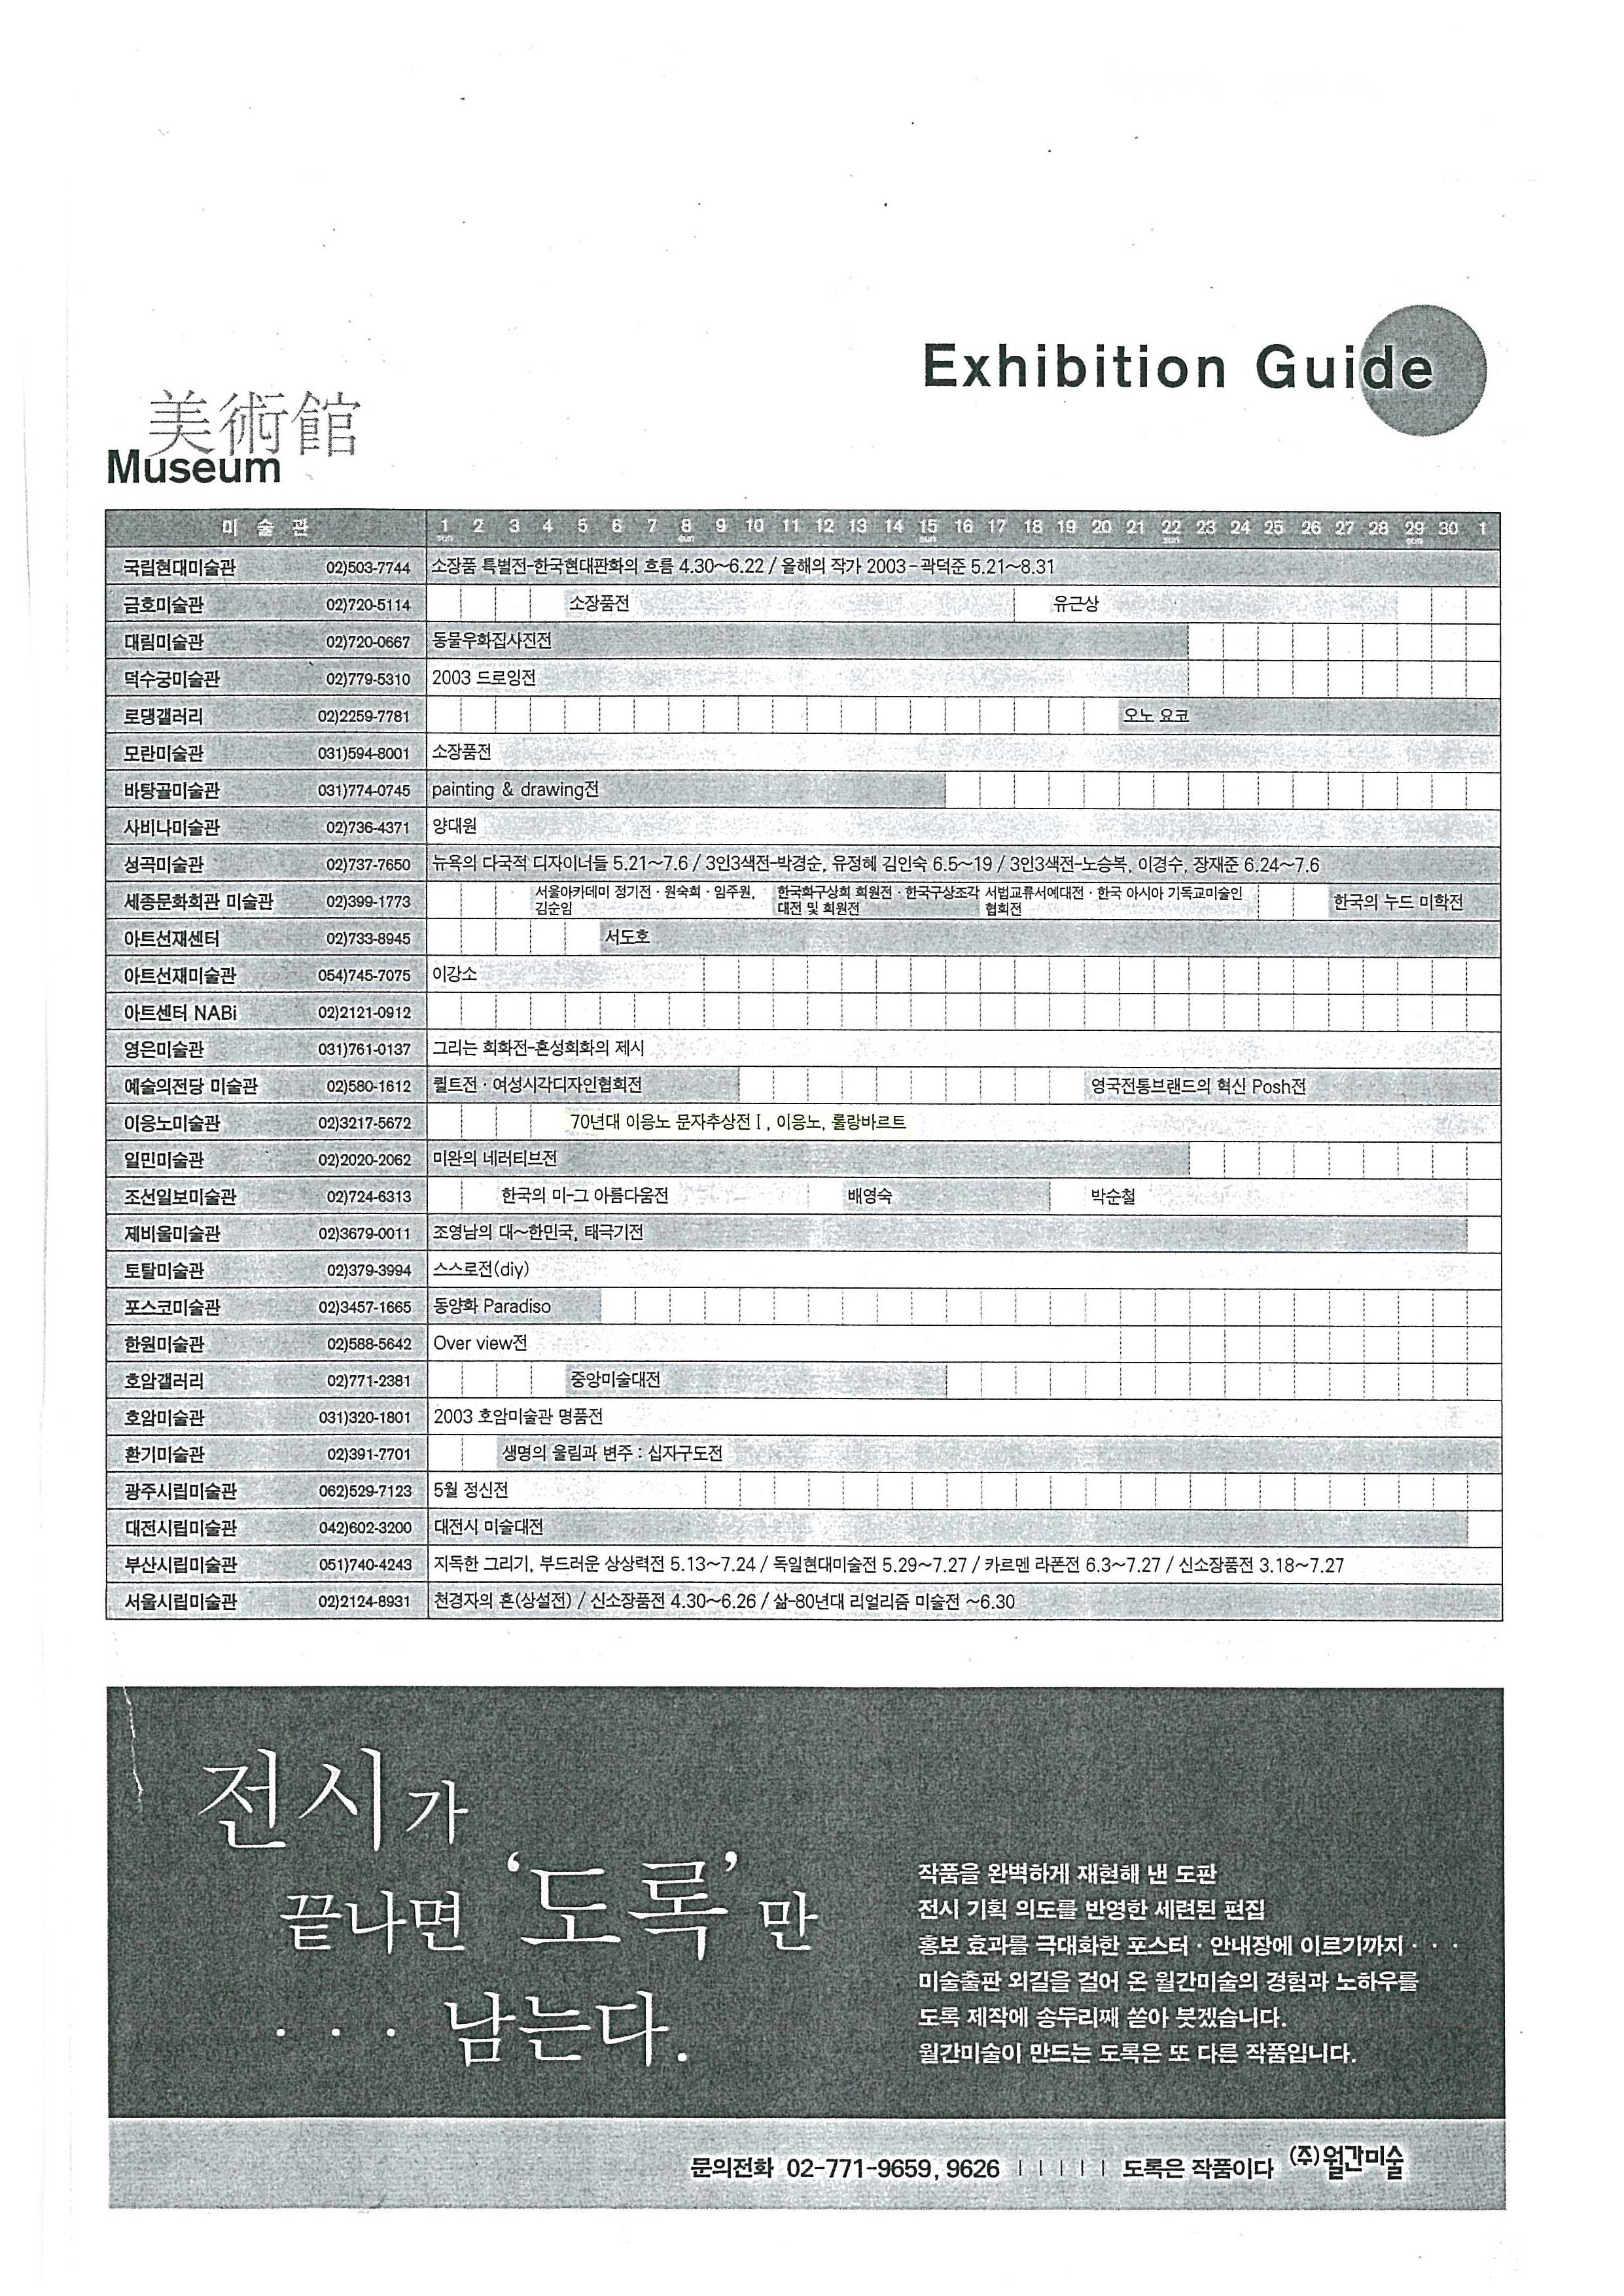 「Exhibition Guide」, 『월간미술』